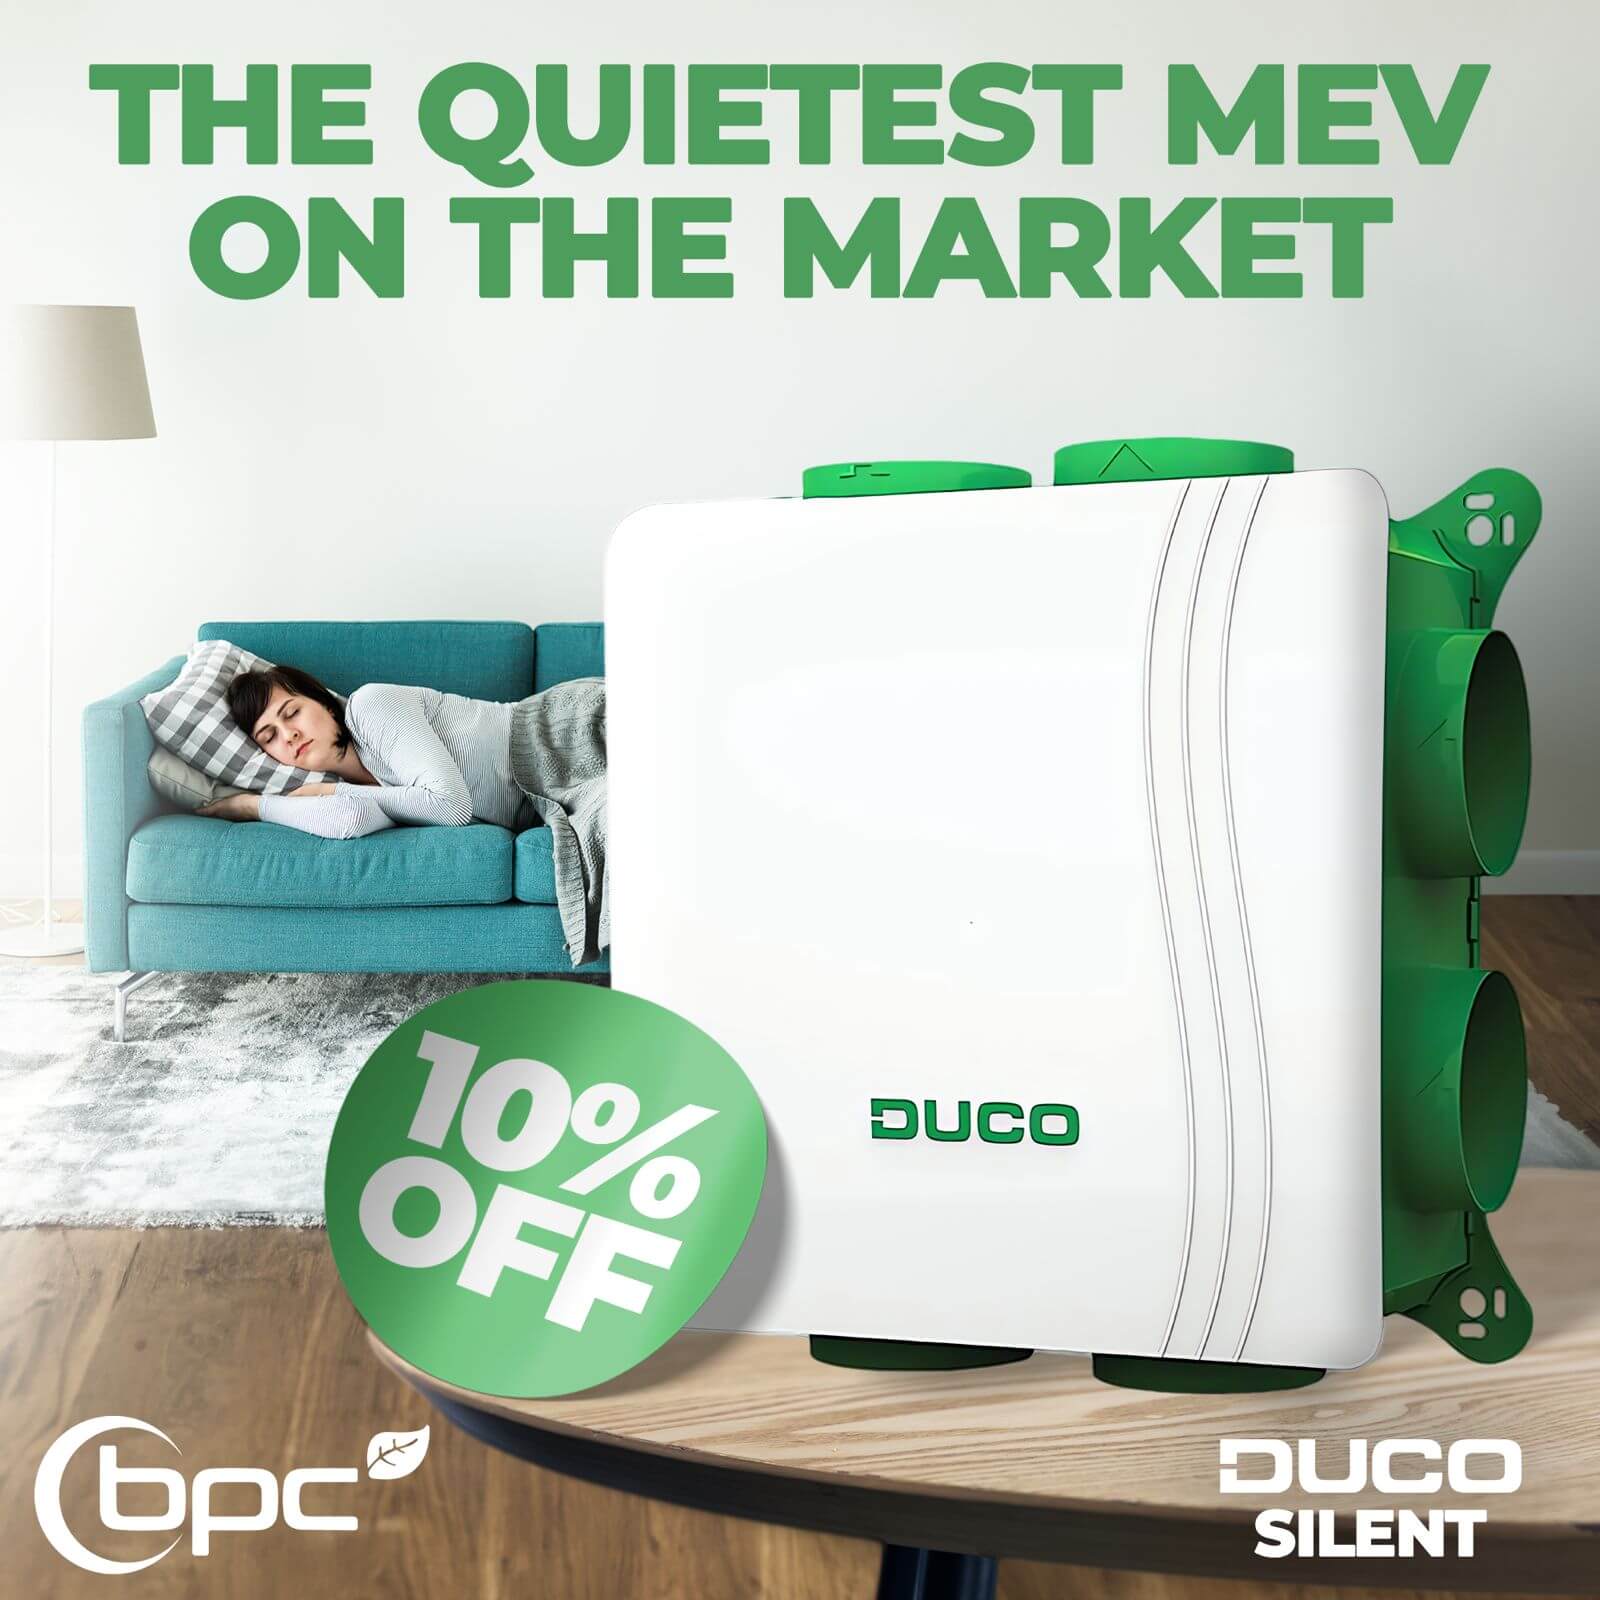 The Duco MEV Silent Box – Now with 10% Off